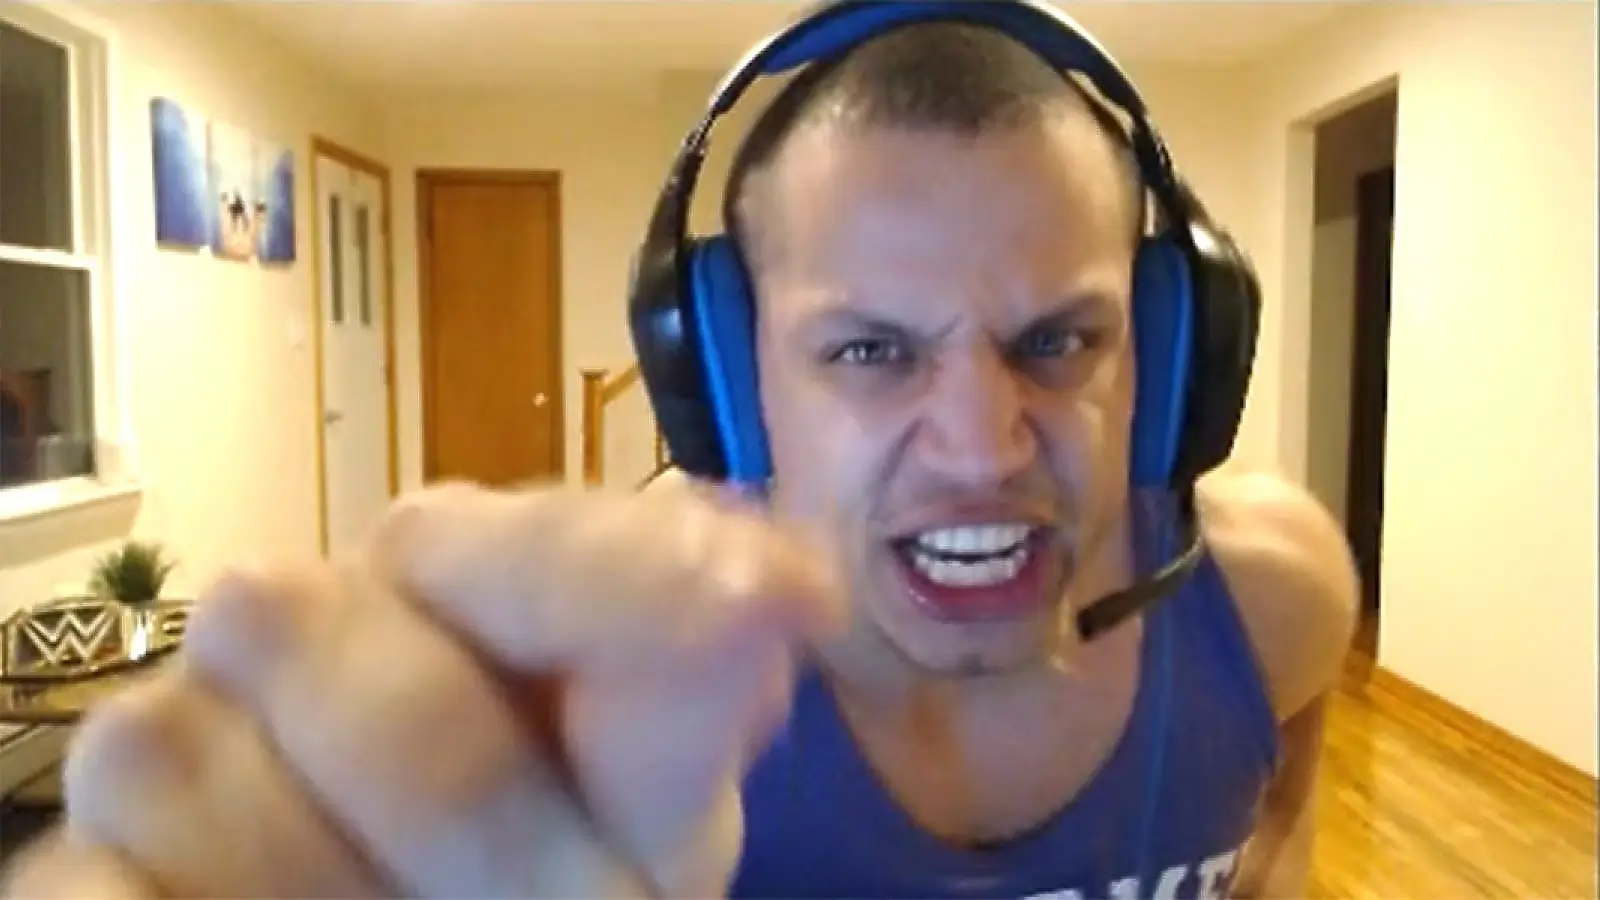 10+ Facts about Tyler1